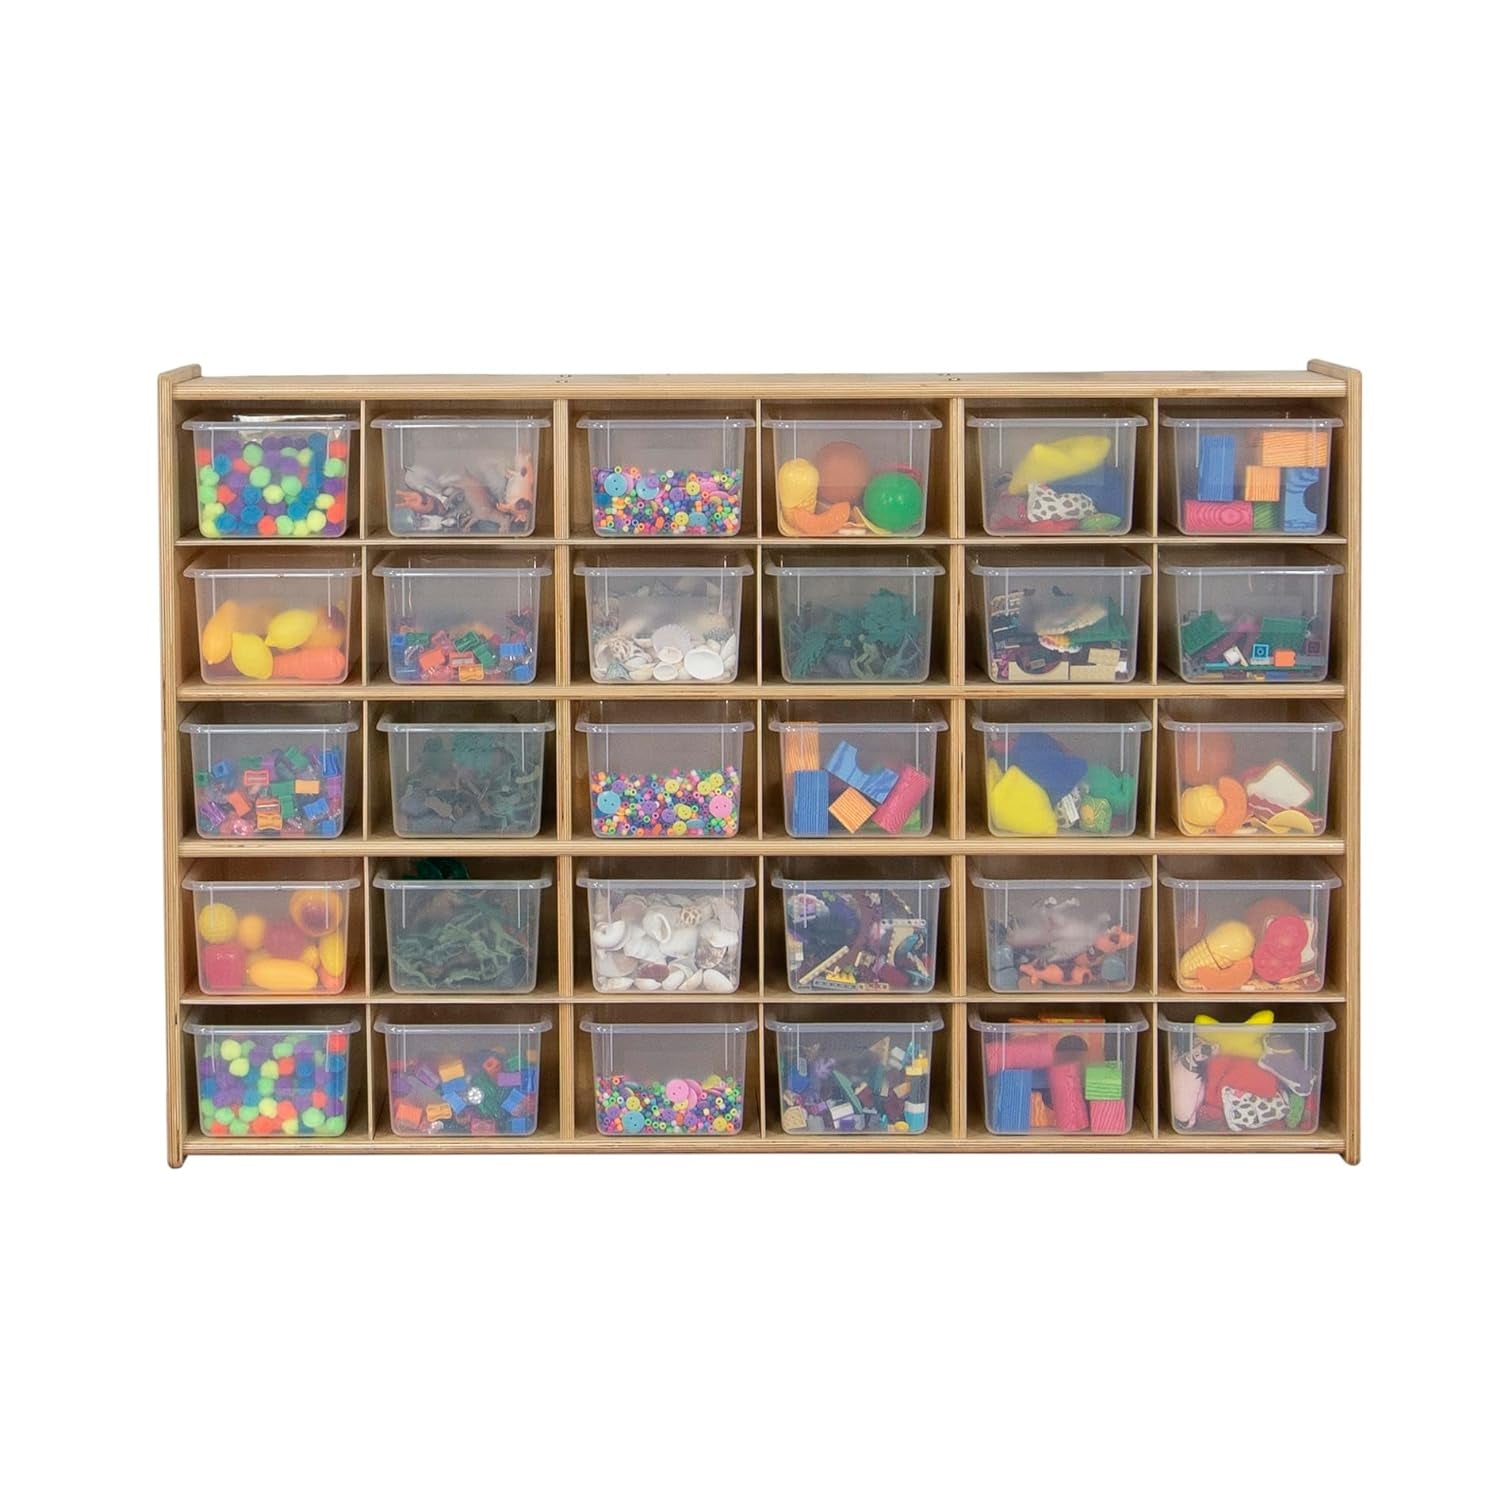 Cubby Storage Organizer Cubes, 20 Cubbies with Clear Plastic Bins, Wood Furniture for Kids Toys, Daycare, Classroom, 47-Inch Width